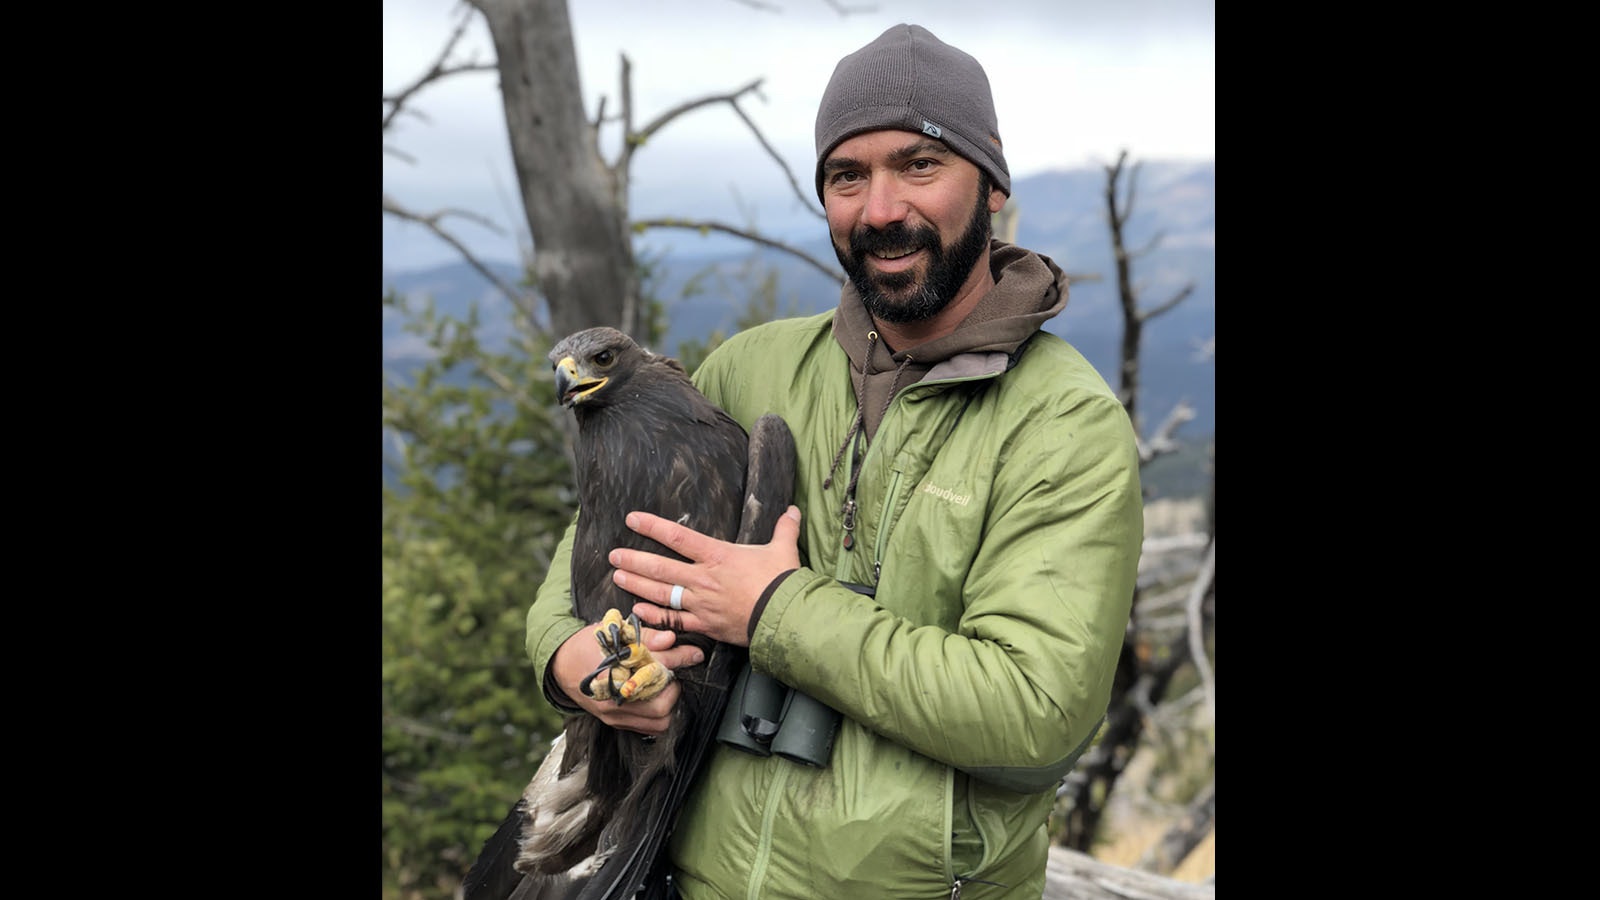 Wyoming Raptor conservationist Bryan Bedrosian says new mapping software can help protect golden eagles from collisions with wind turbines and other hazards.